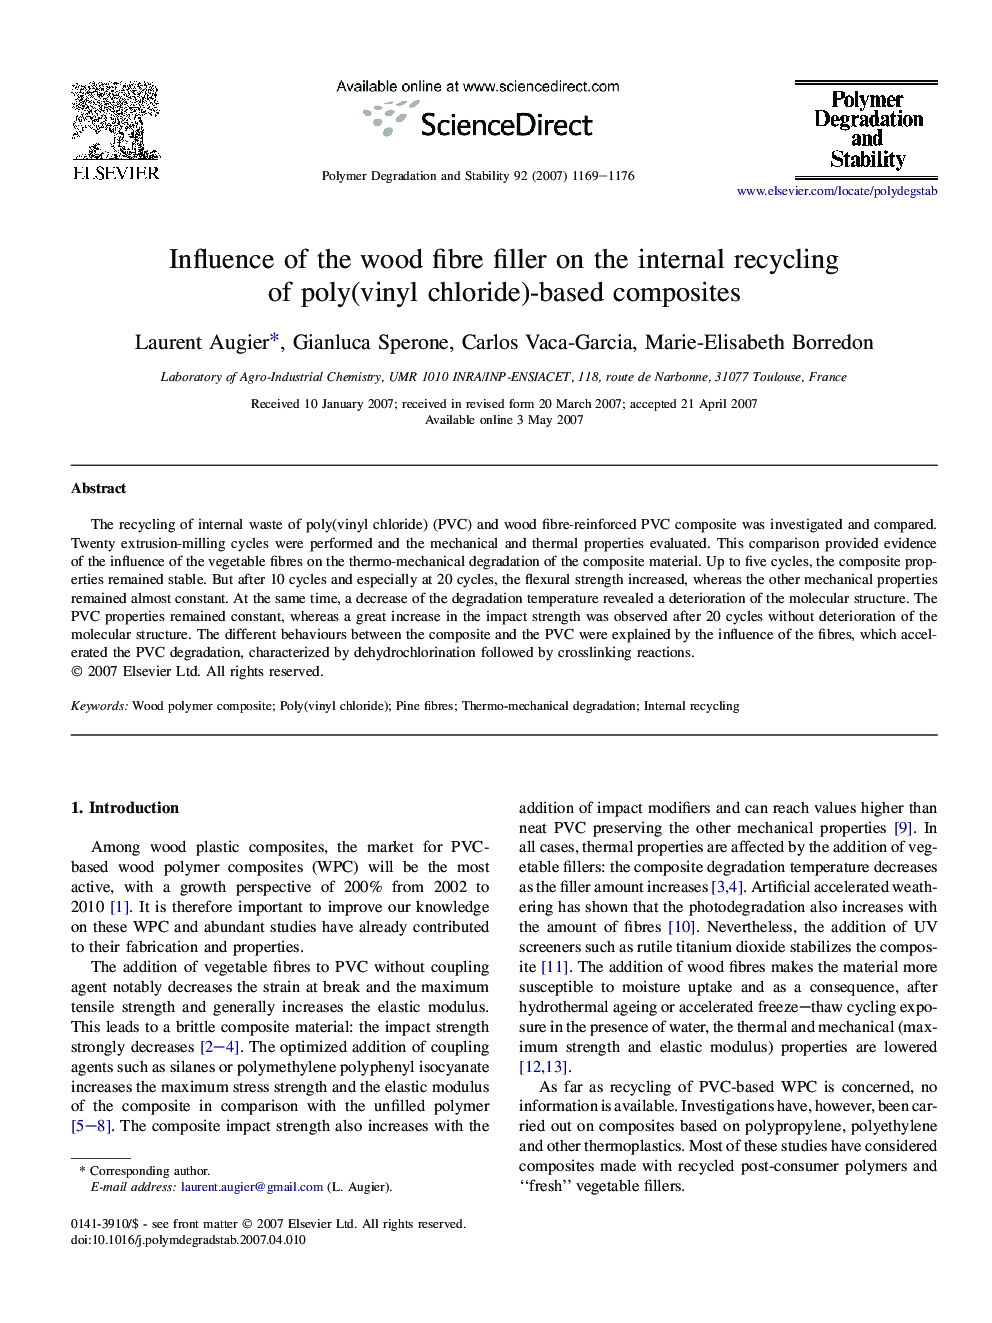 Influence of the wood fibre filler on the internal recycling of poly(vinyl chloride)-based composites